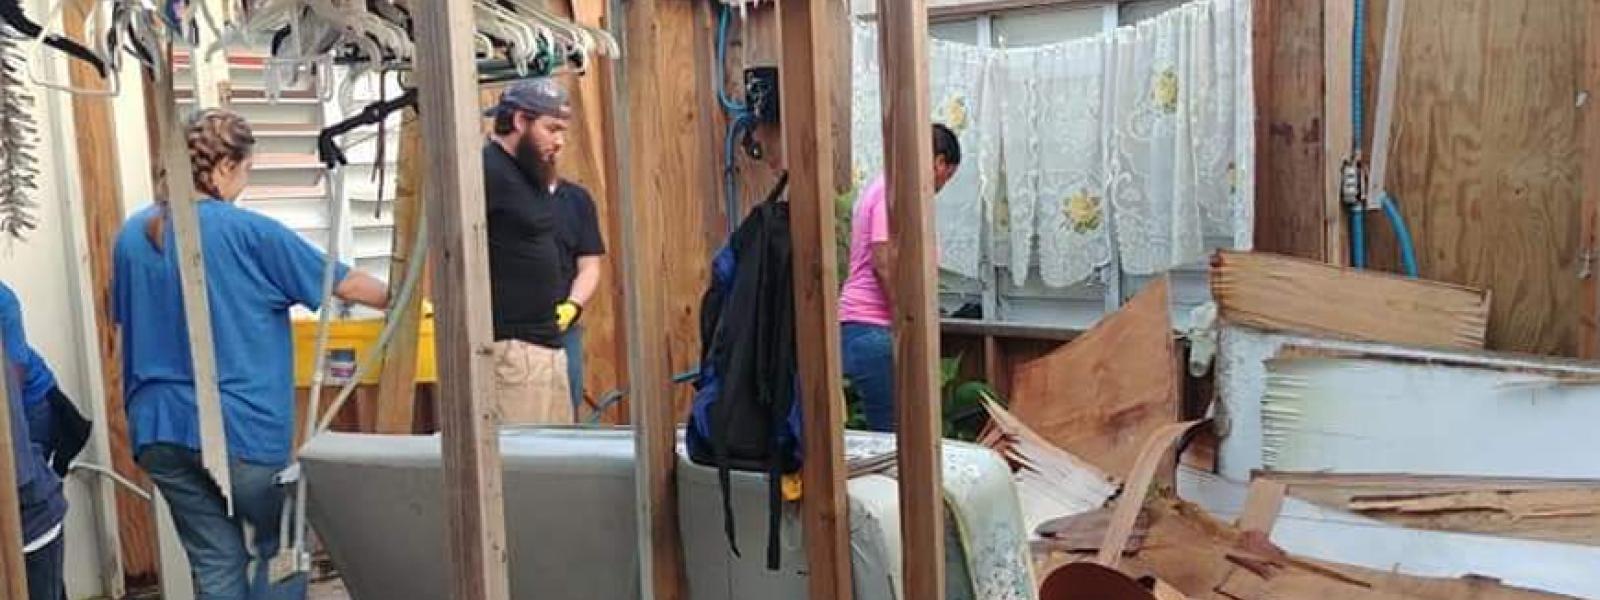 CIU students providing disaster relief to victims of hurricanes in Puerto Rico.